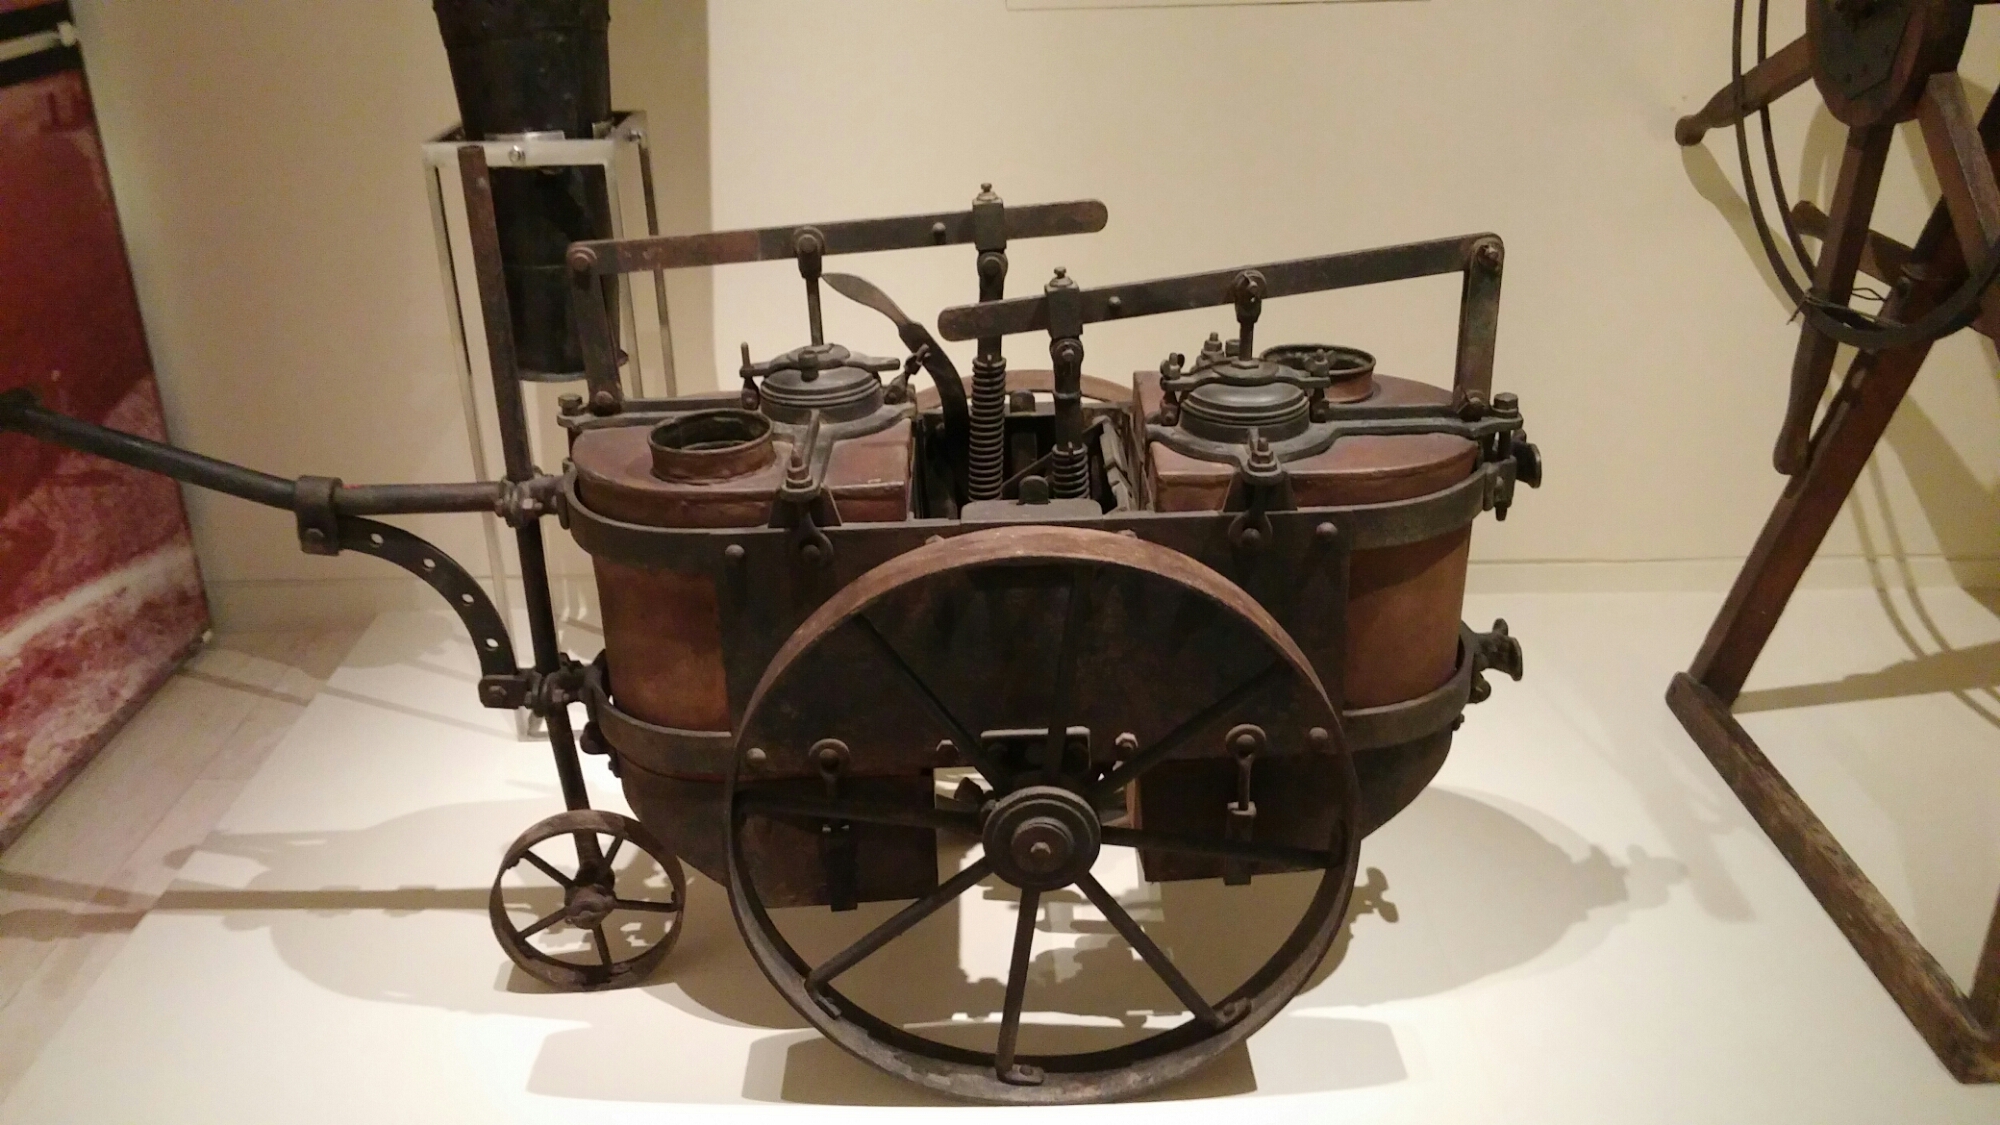 Early spreader for “Bordeaux mixture”